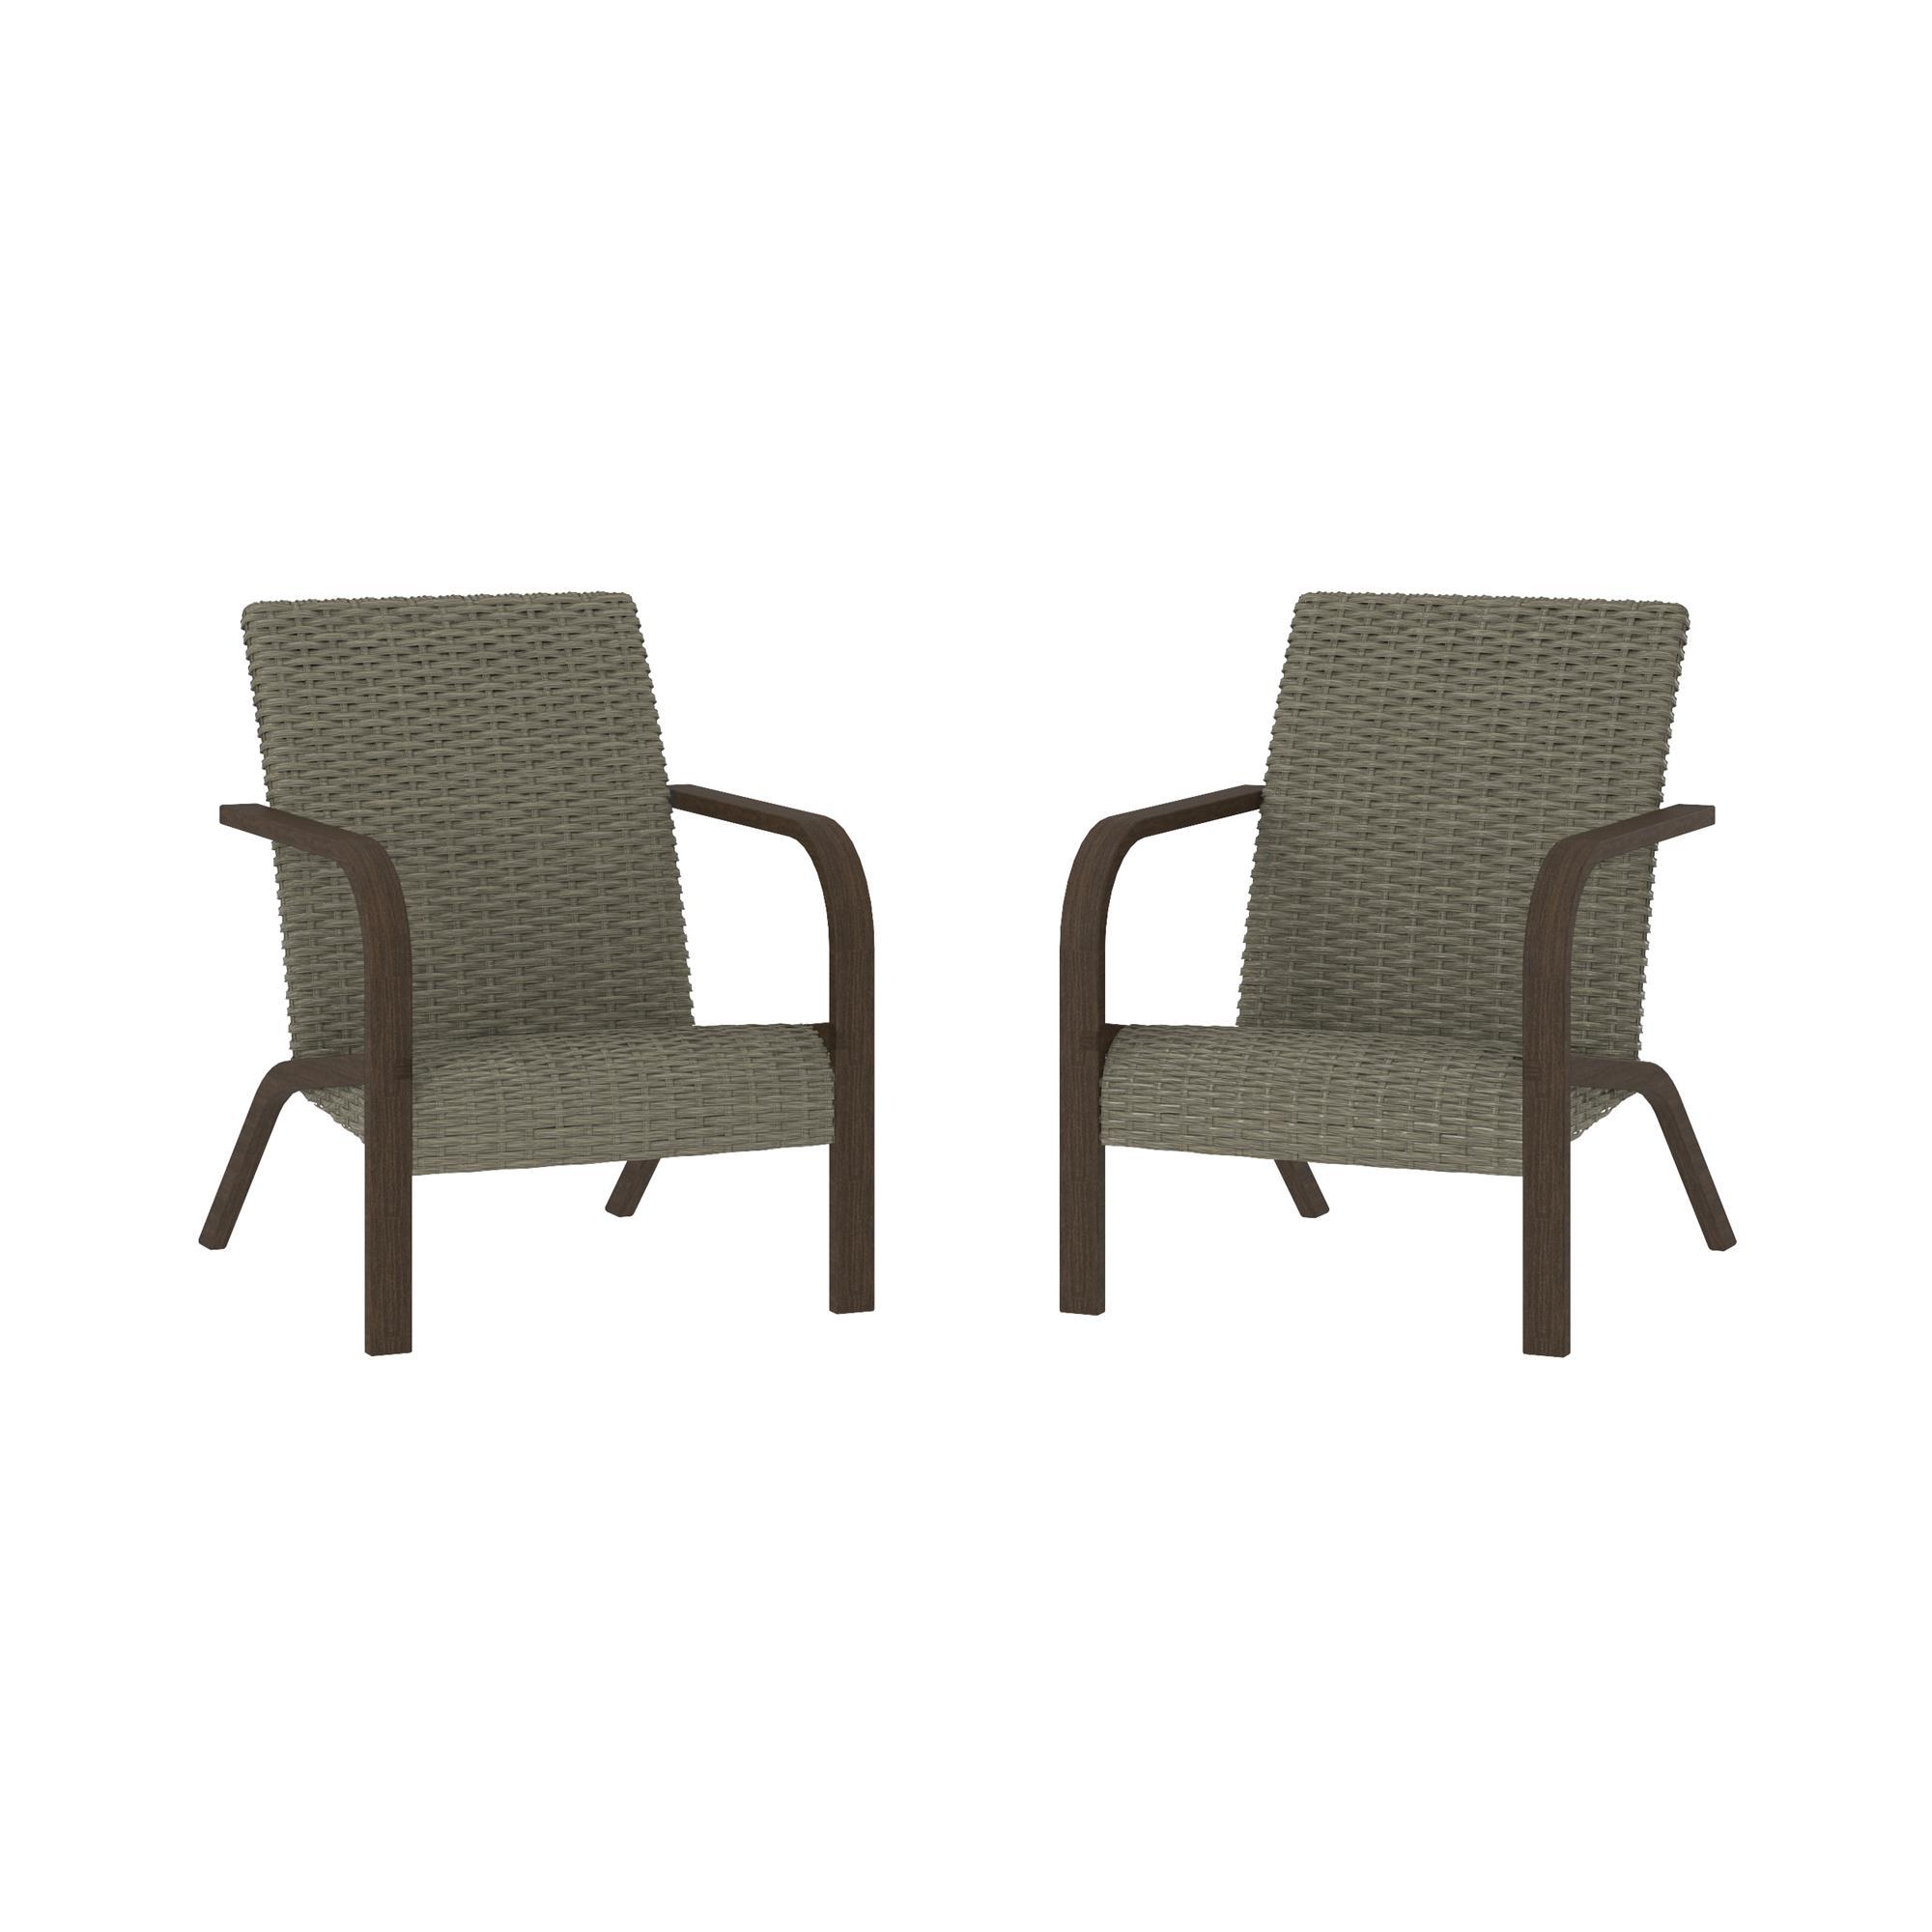 COSCO Outdoor Living, SmartWick, Patio Lounge Chairs, 2-Pack, Warm Gray - image 5 of 9